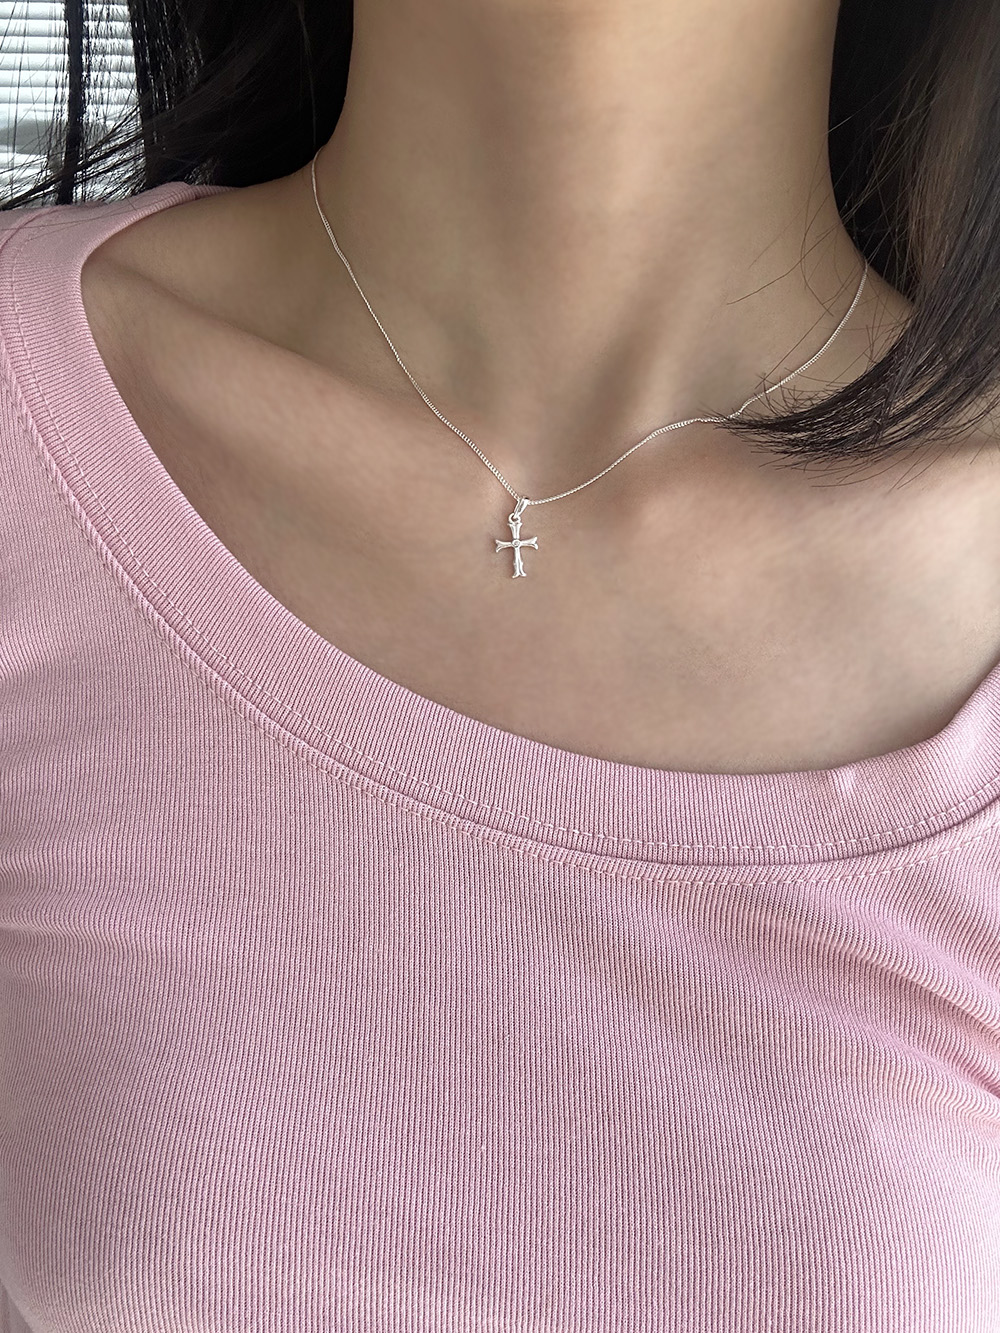 [92.5 silver] Chrome cross necklace